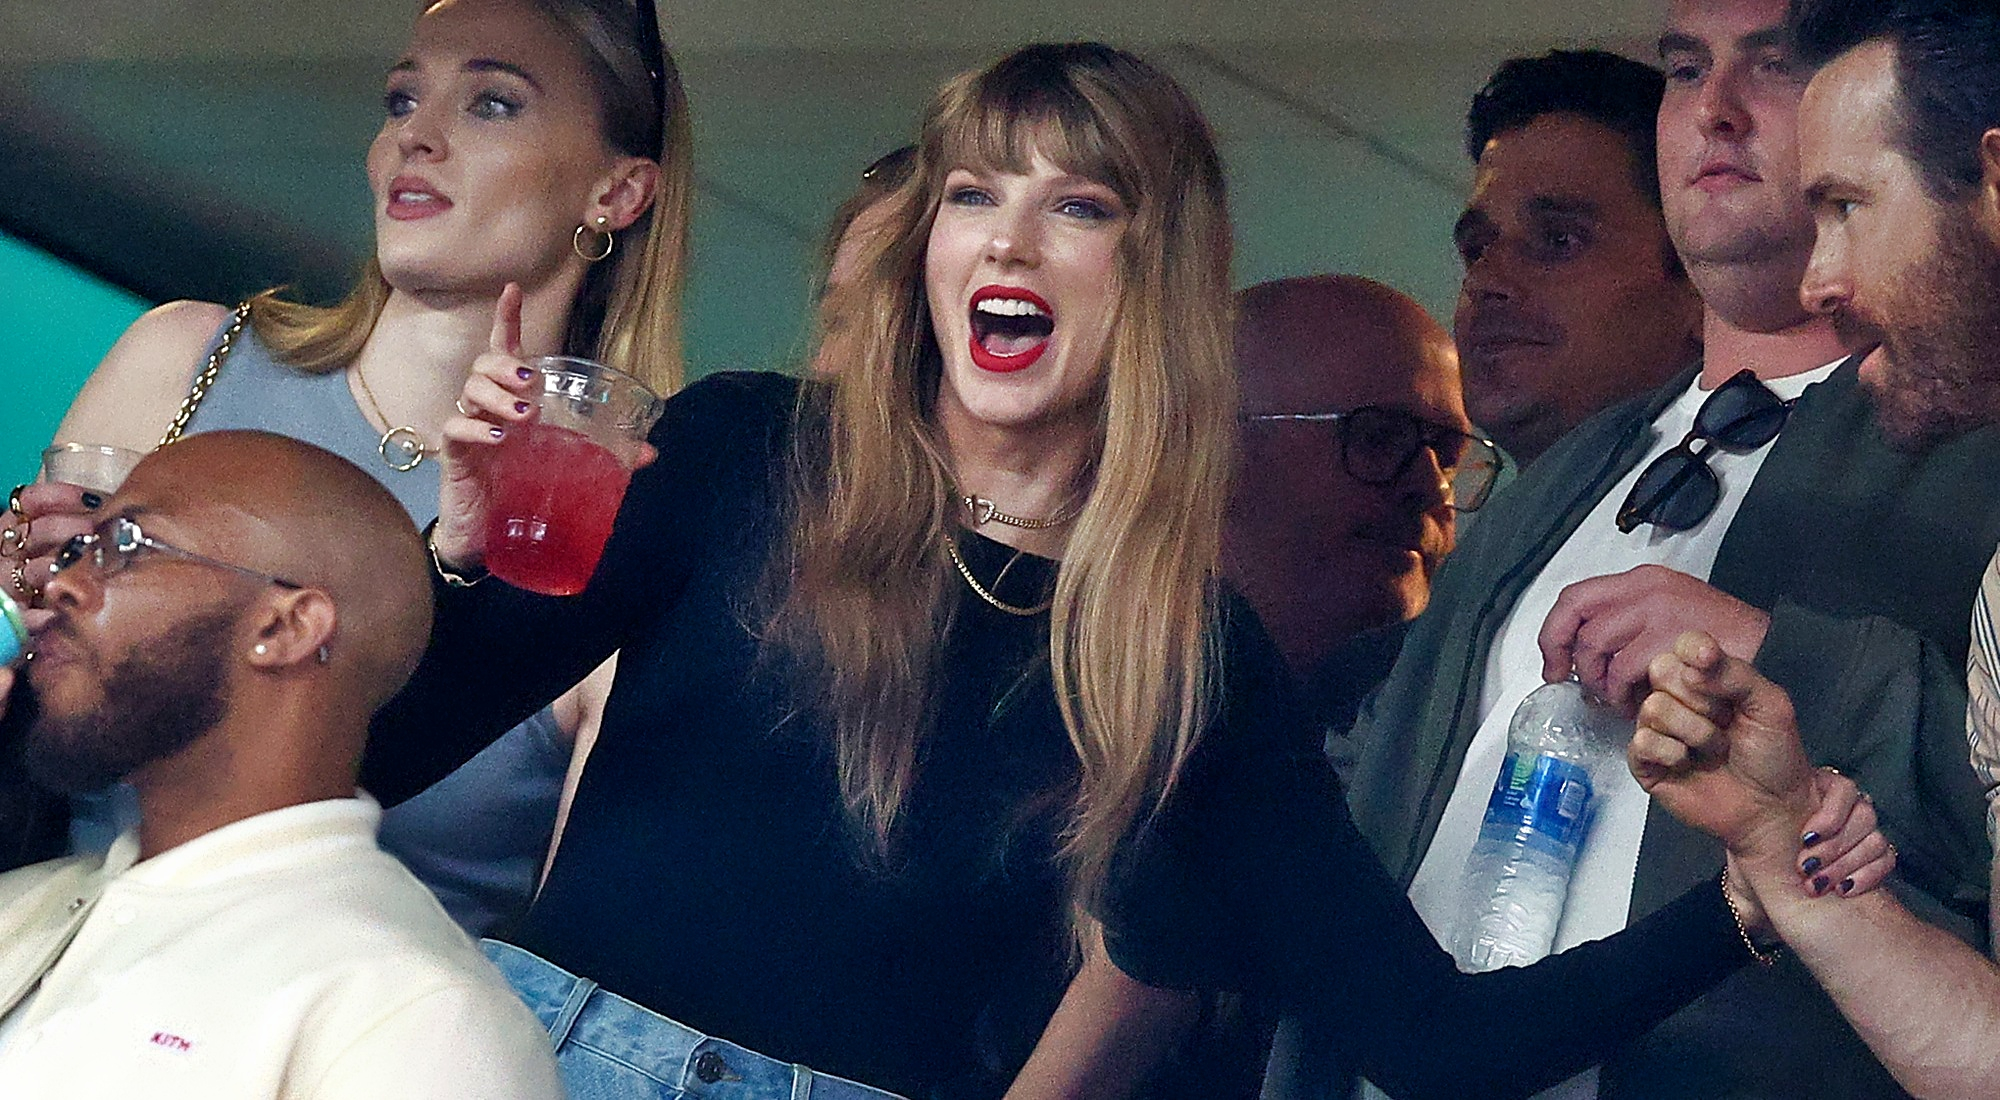 Taylor Swift and Travis Kelce attend the Met Gala, immediately the arrived Taylor Swift carry out three bottles of alcohol and got herself drunk, Cheek out the bad word she started saying to Travis Kelce..